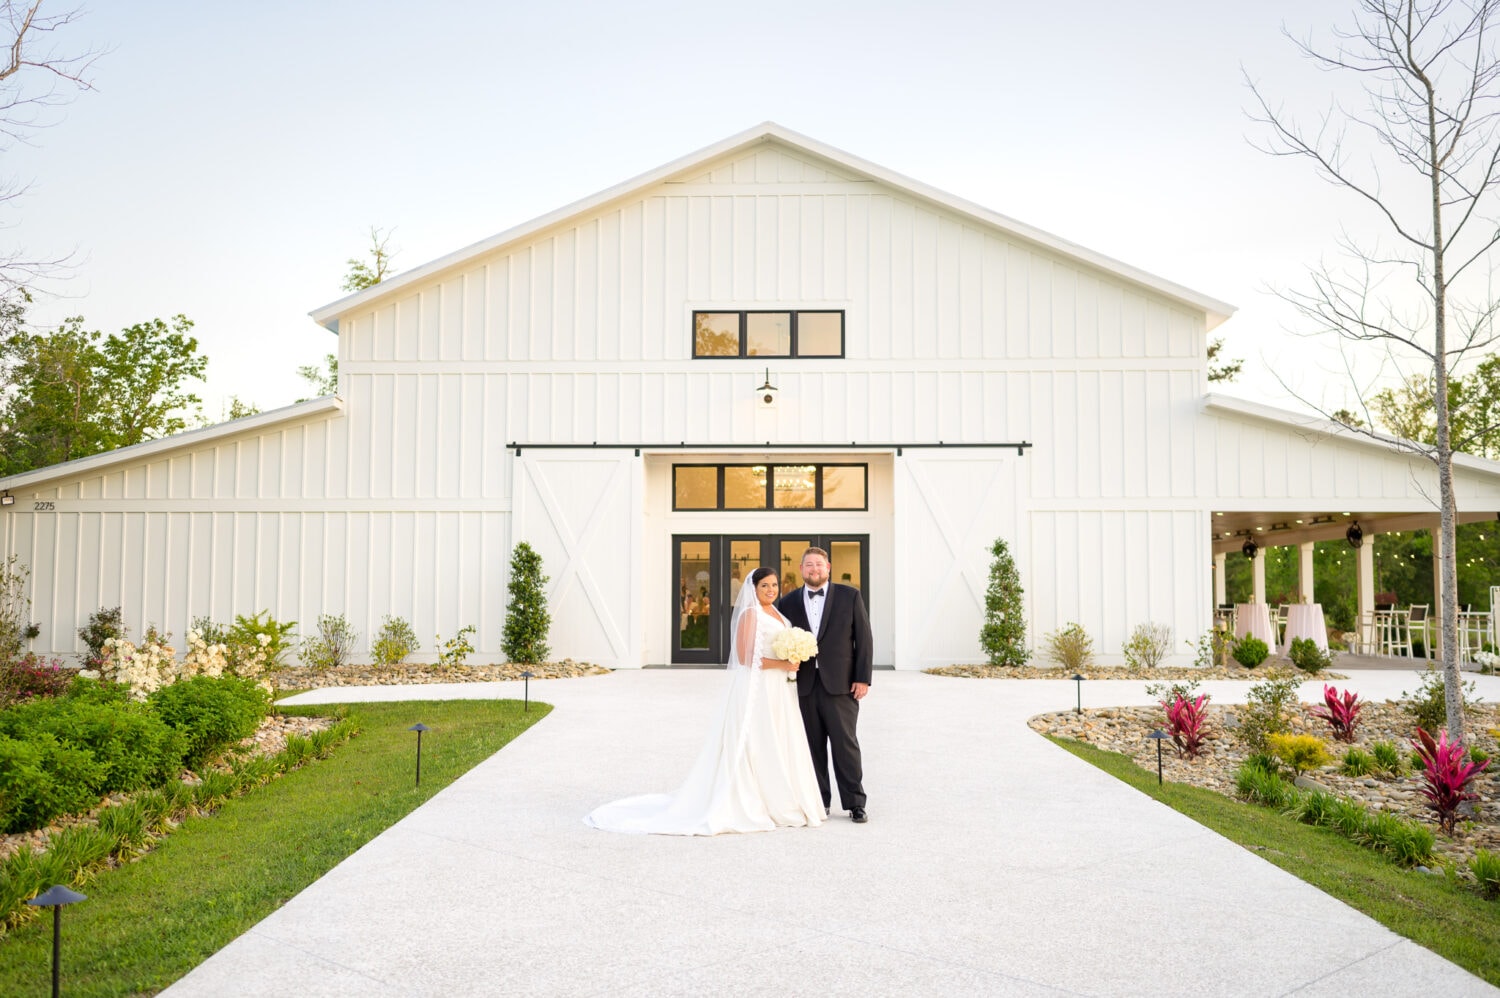 Bride and groom in front of the ballroom - The Venue at White Oaks Farm